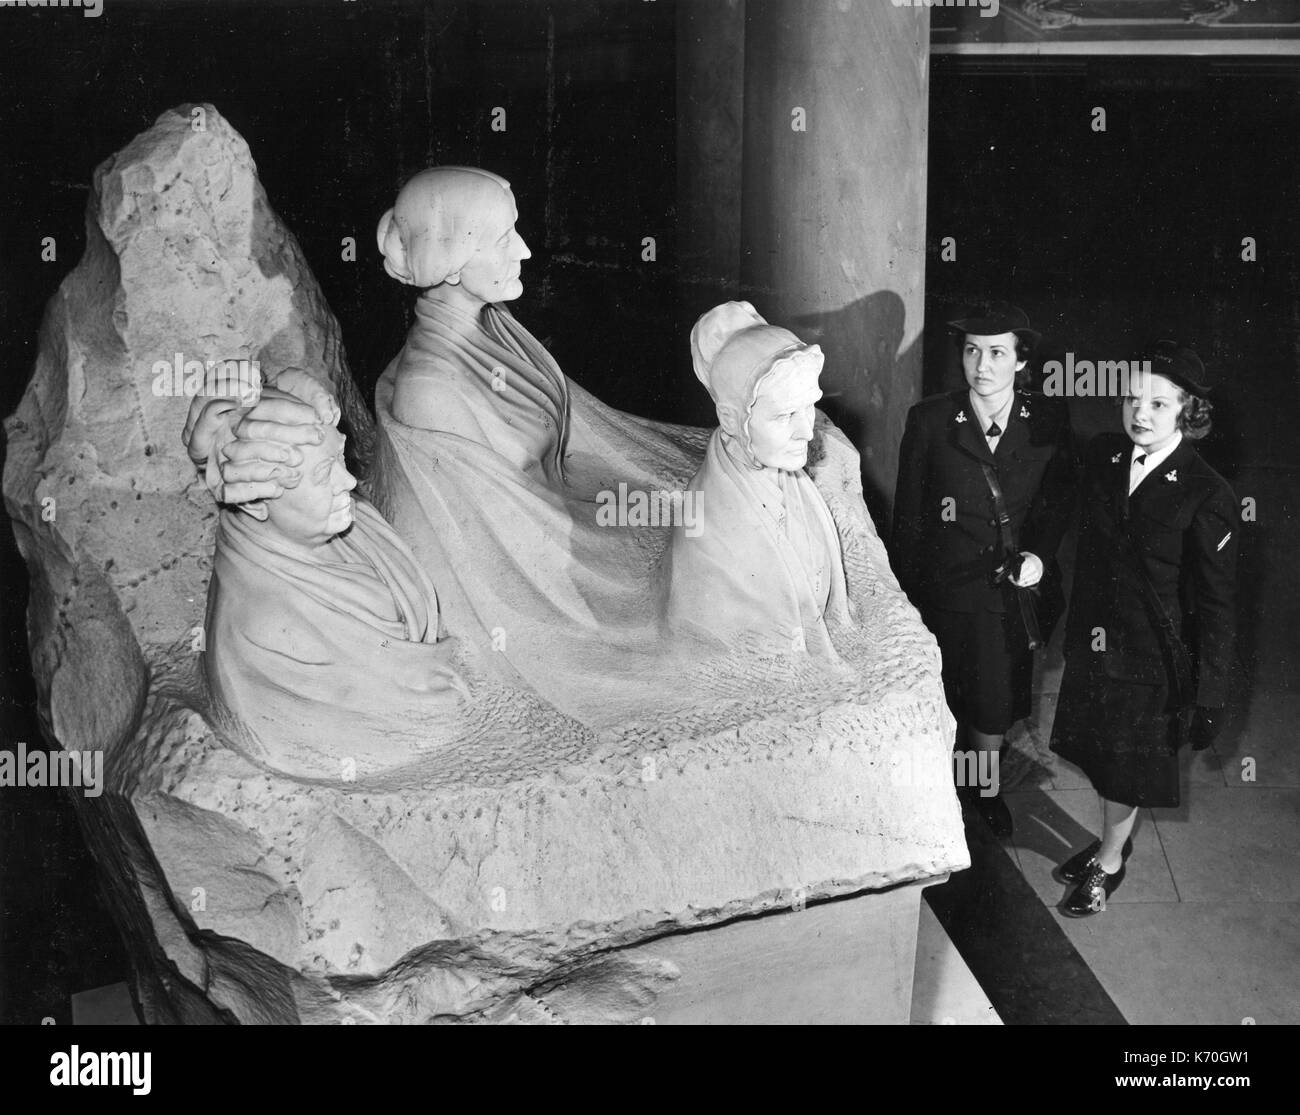 In the crypt below the Rotunda of the US Capitol is this 8-ton statue - a tribute to three American women's rights leaders, Elizabeth Cady Stanton, Susan B. Anthony and Lucretia Mott. Executed by Adelaide Johnson, the figure in the left corner was left unfinished to convey the old adage that 'woman's work is never done.' Here, two WAVES, typifying the American women of today, gaze at the three pioneers. 1945, Washington, DC. Stock Photo